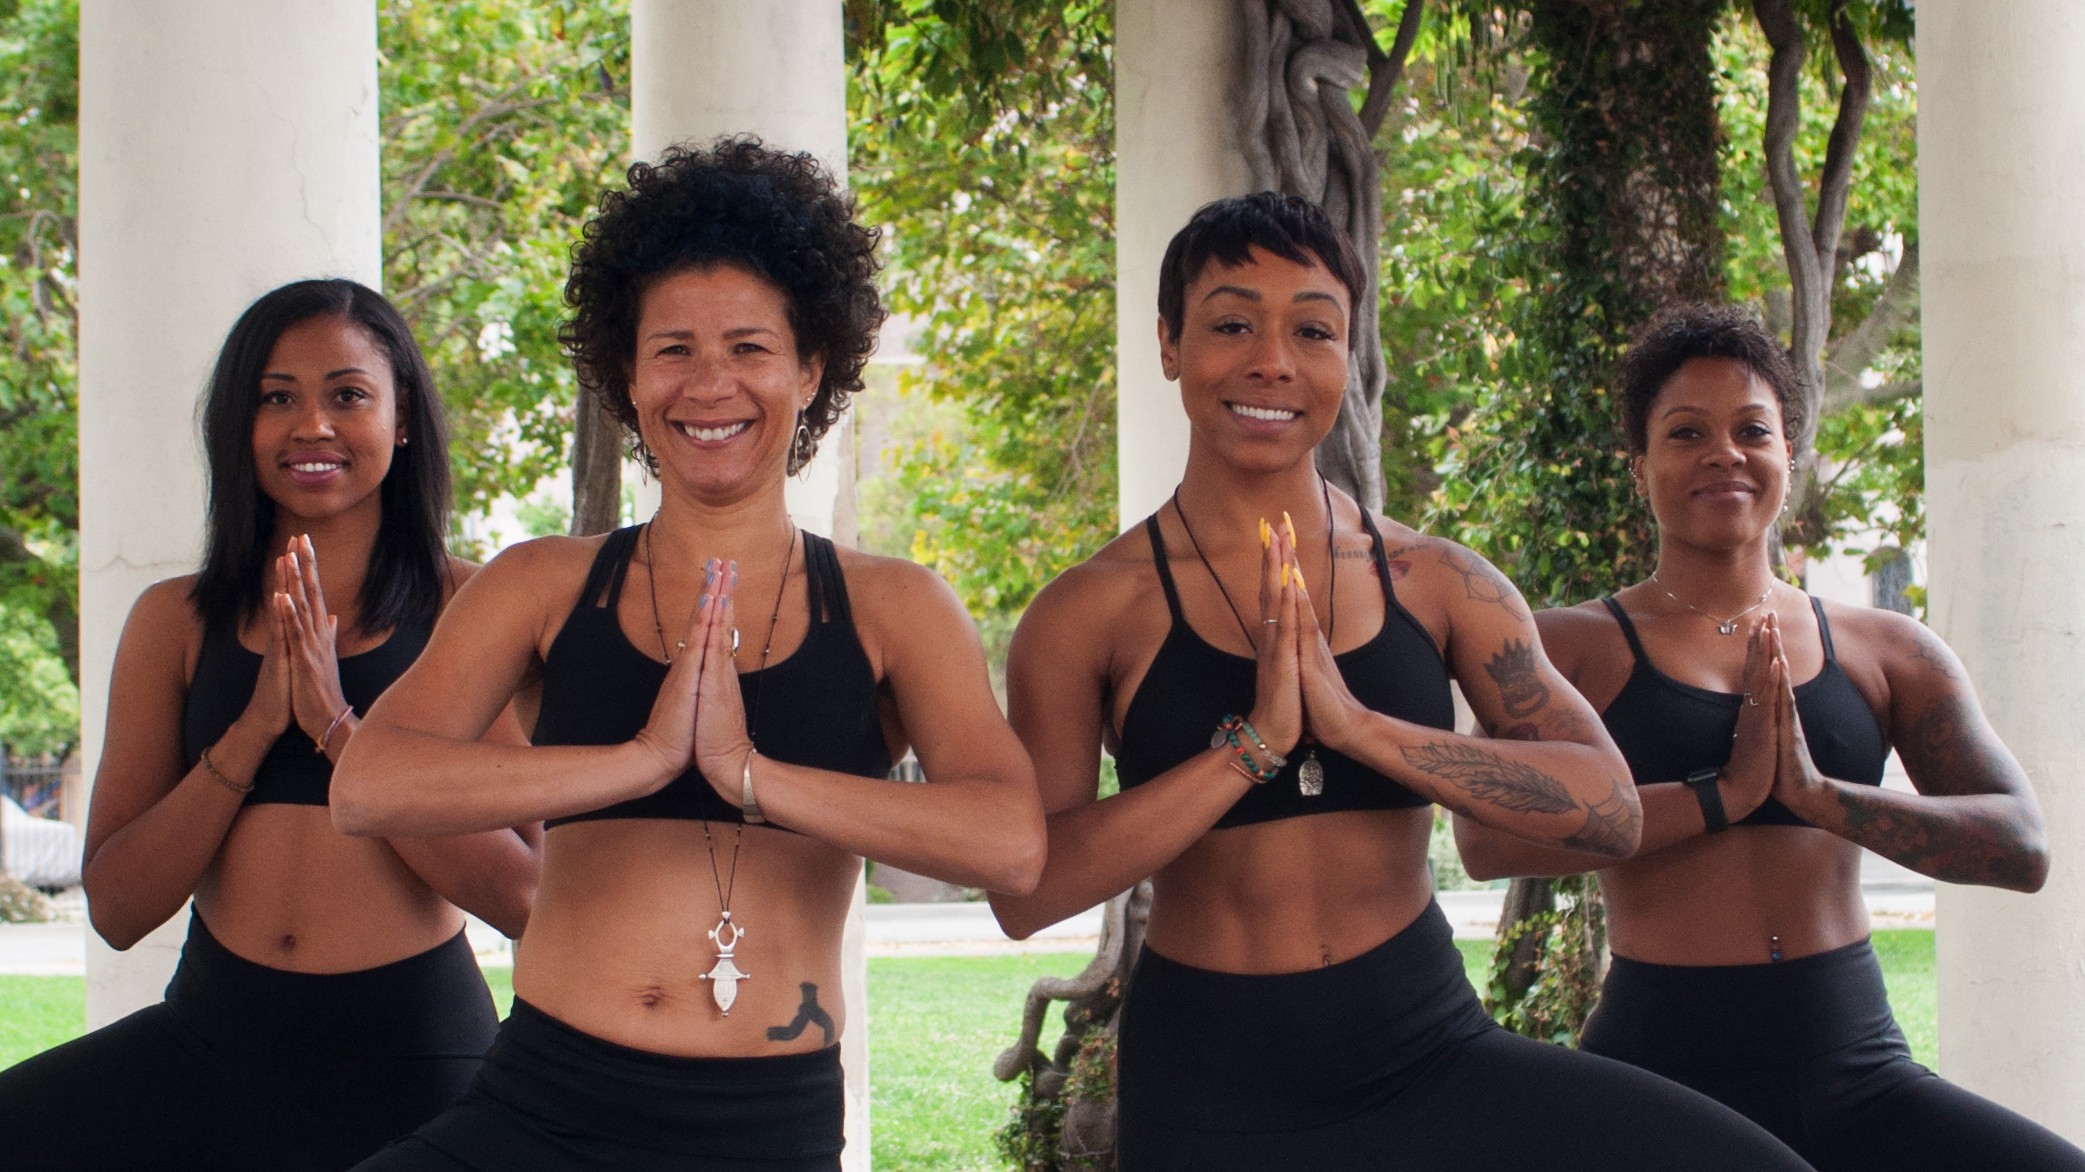 Black to Yoga Aims to Make Yoga Accessible for Black and Brown Bodies, East Bay Express